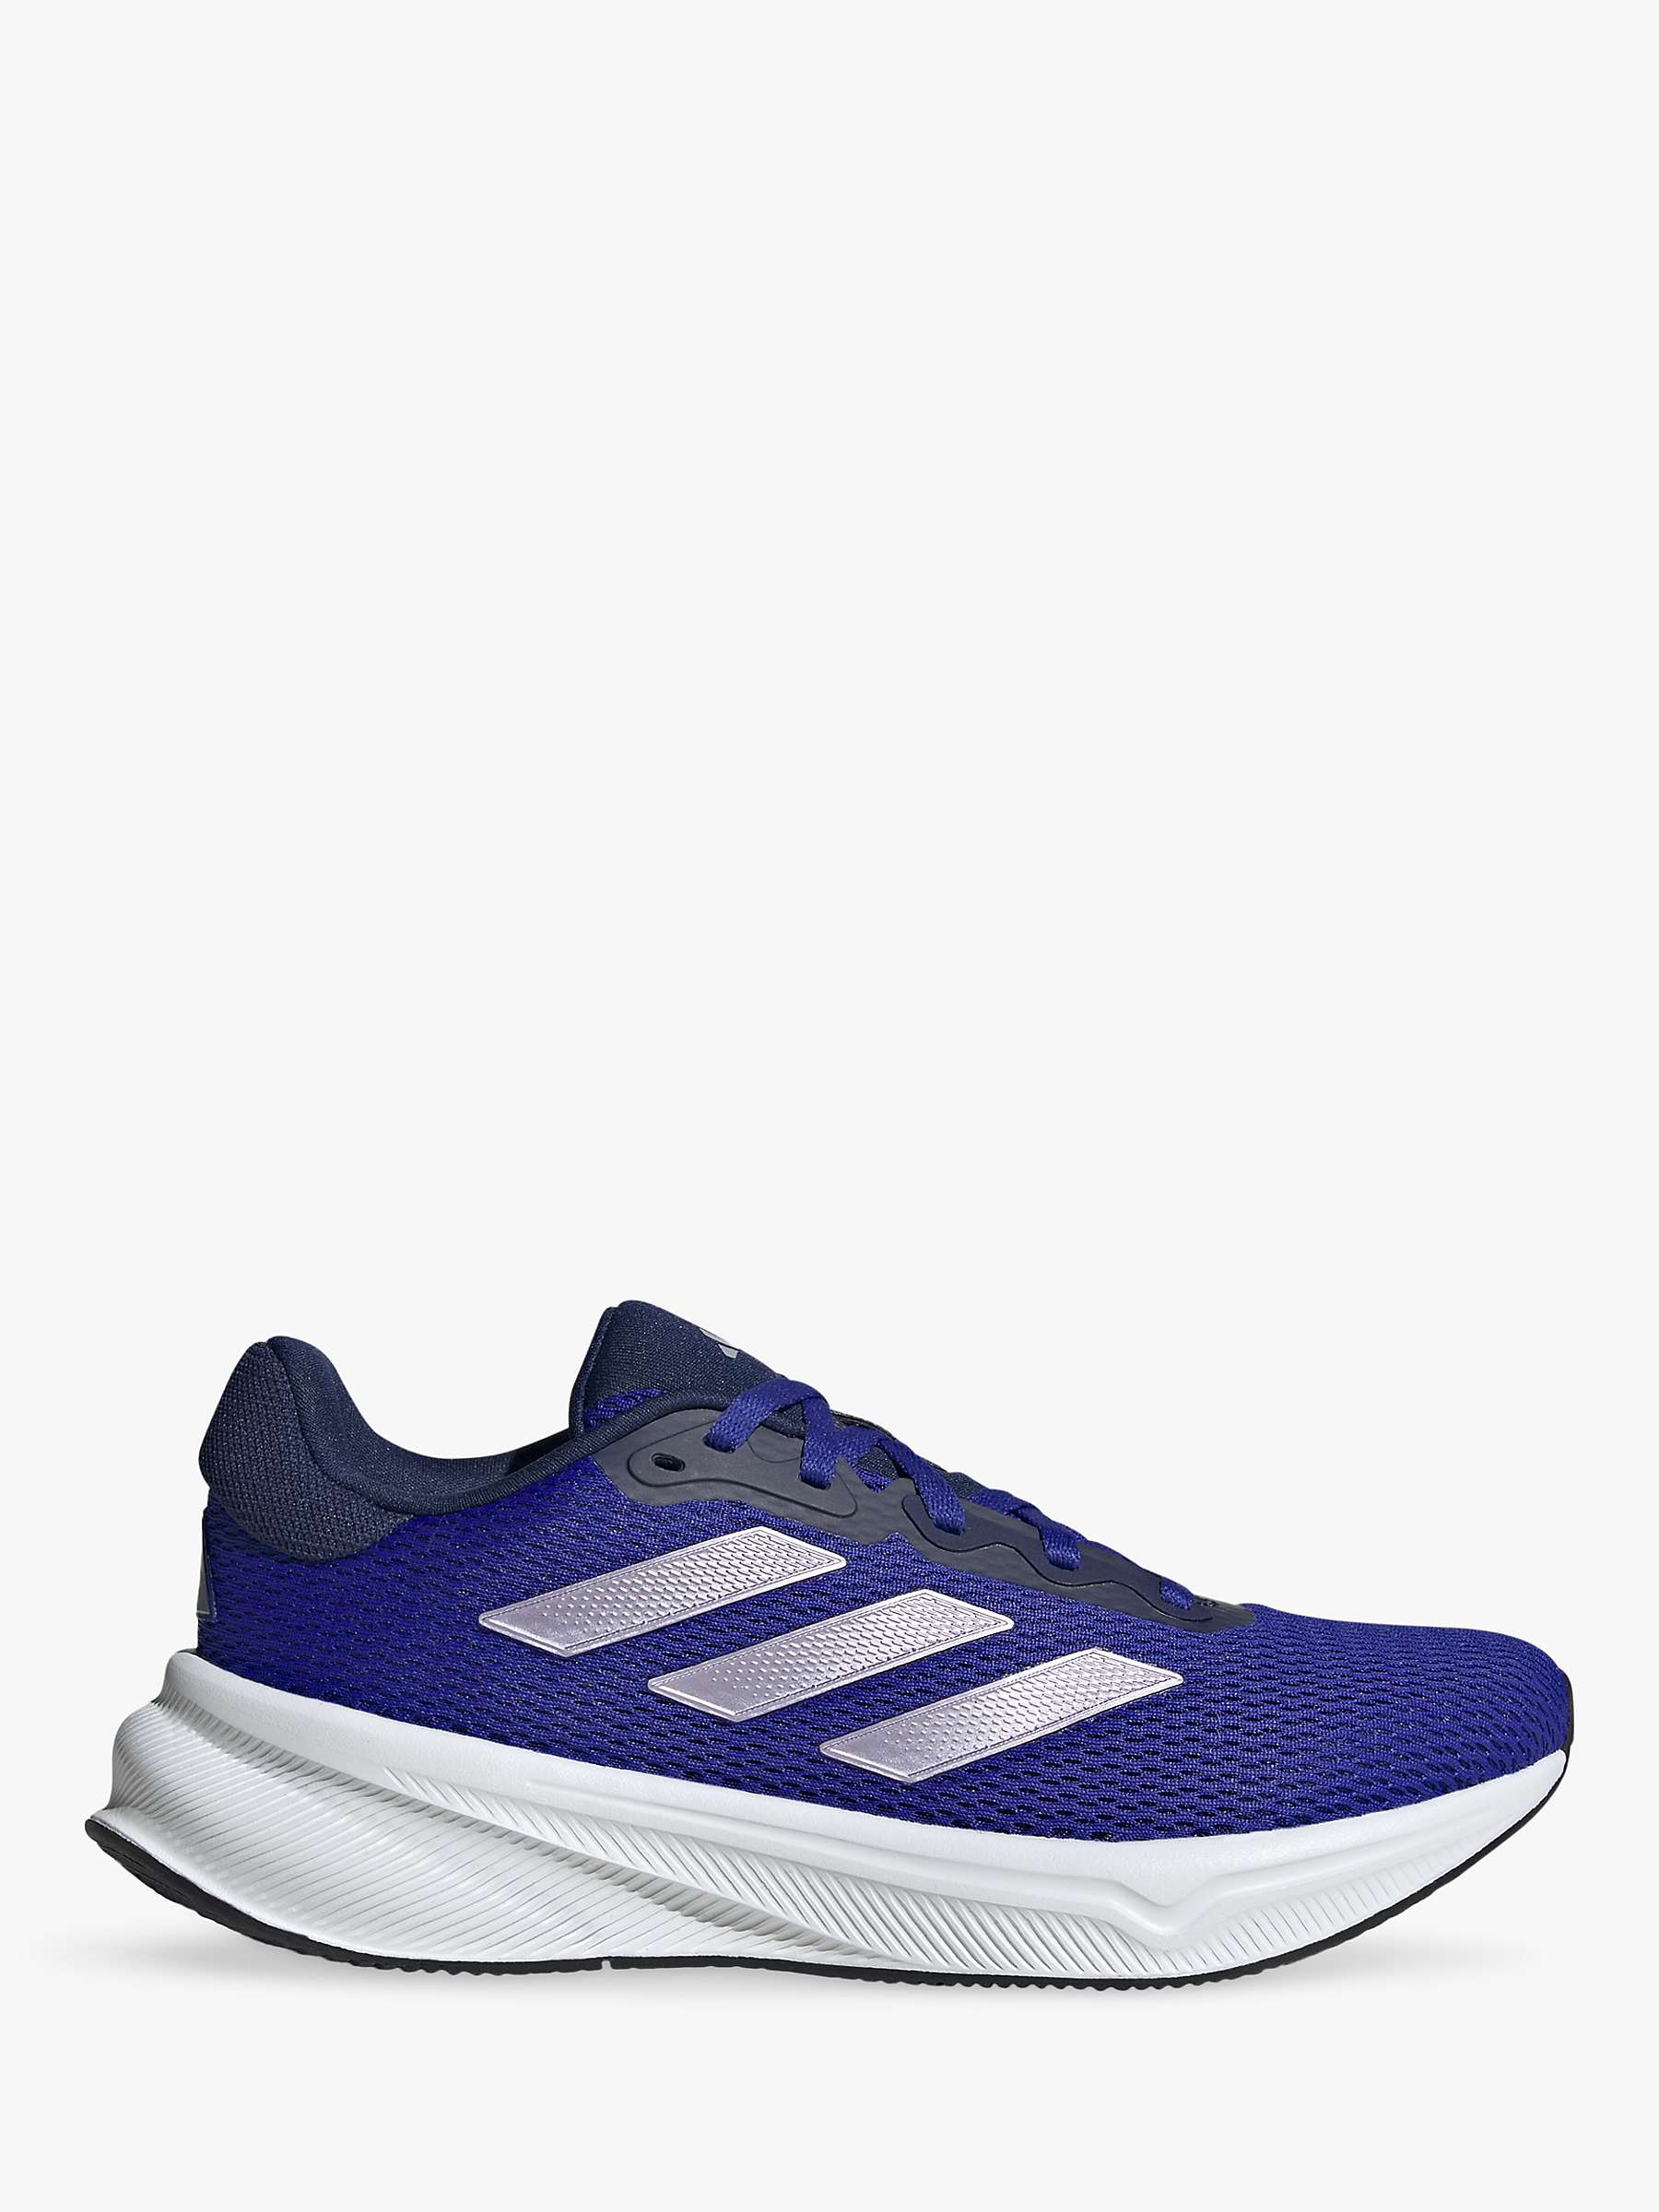 Buy adidas Response W Women's Running Shoes, Blue/Lilac Online at johnlewis.com